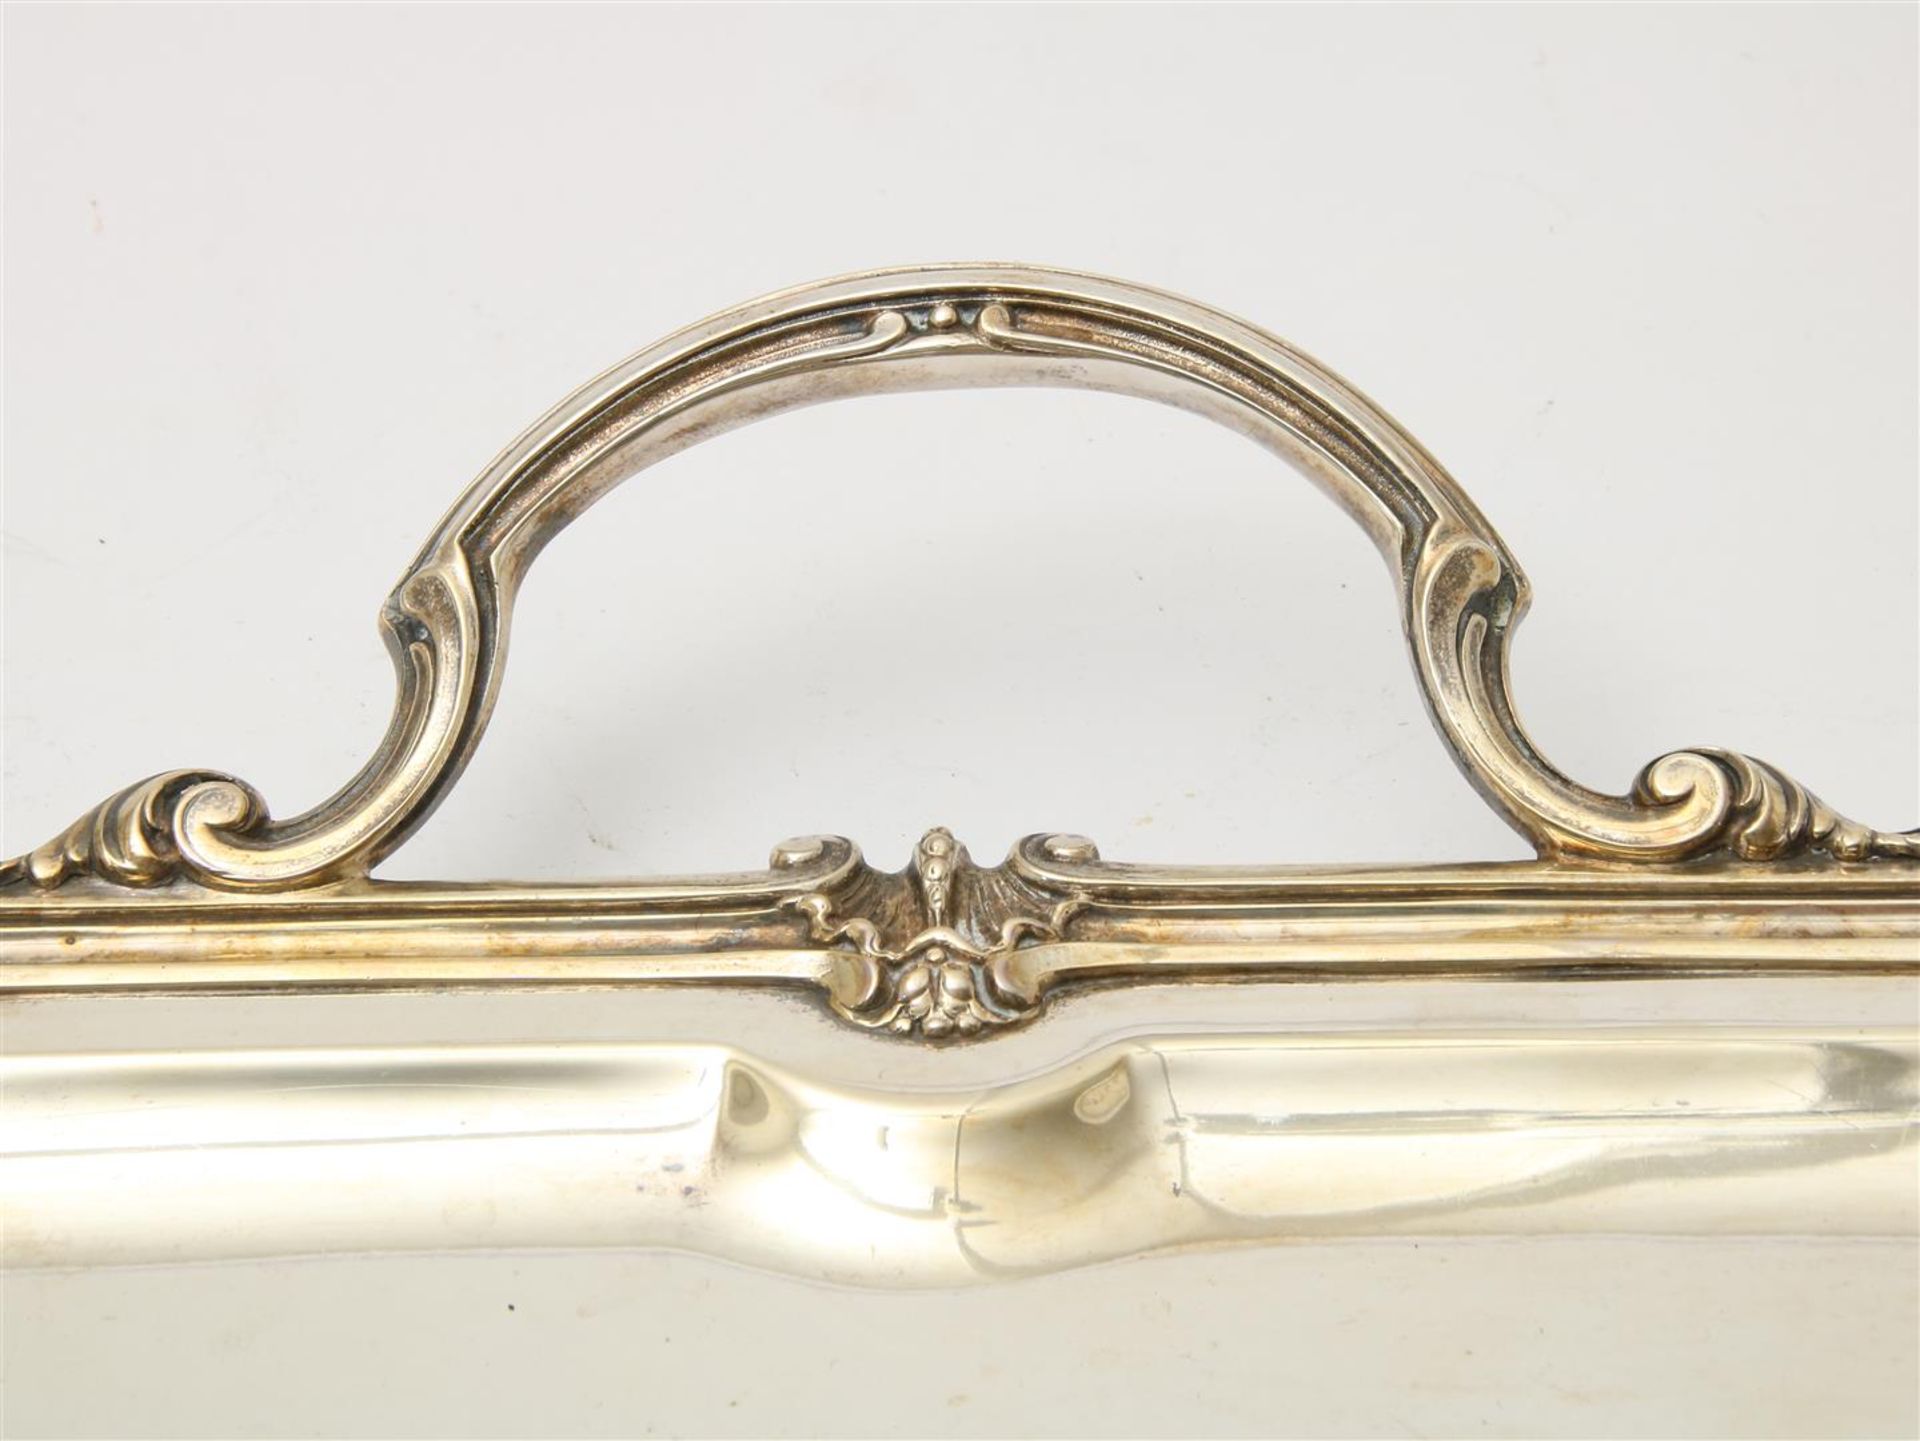 Silver tray with raised edge, fillet and shell motif, 2 handles, 62 x 39 cm. Including plated - Image 4 of 5